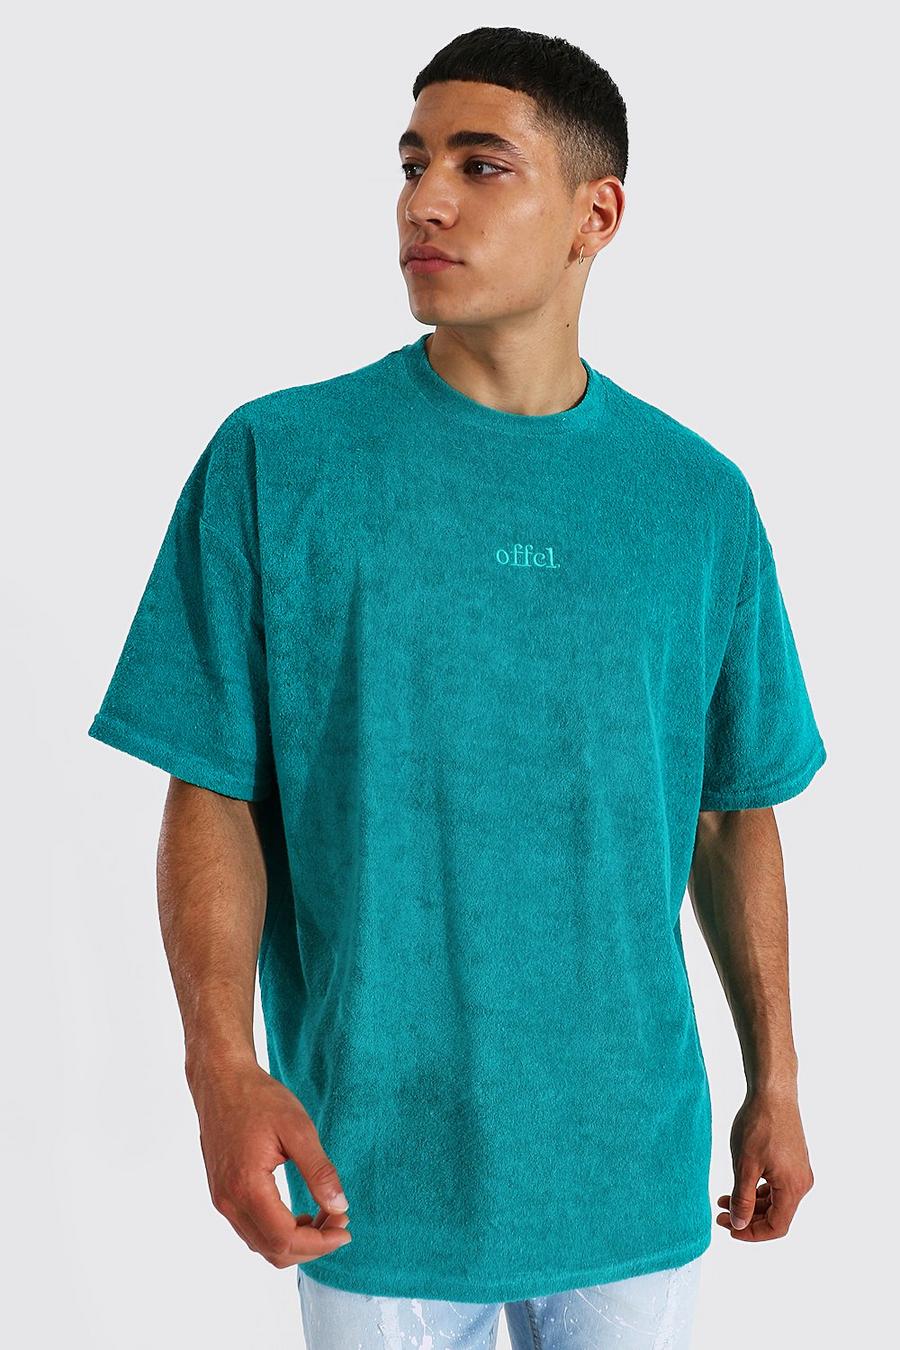 Teal Oversized Offcl Towelling T-shirt image number 1